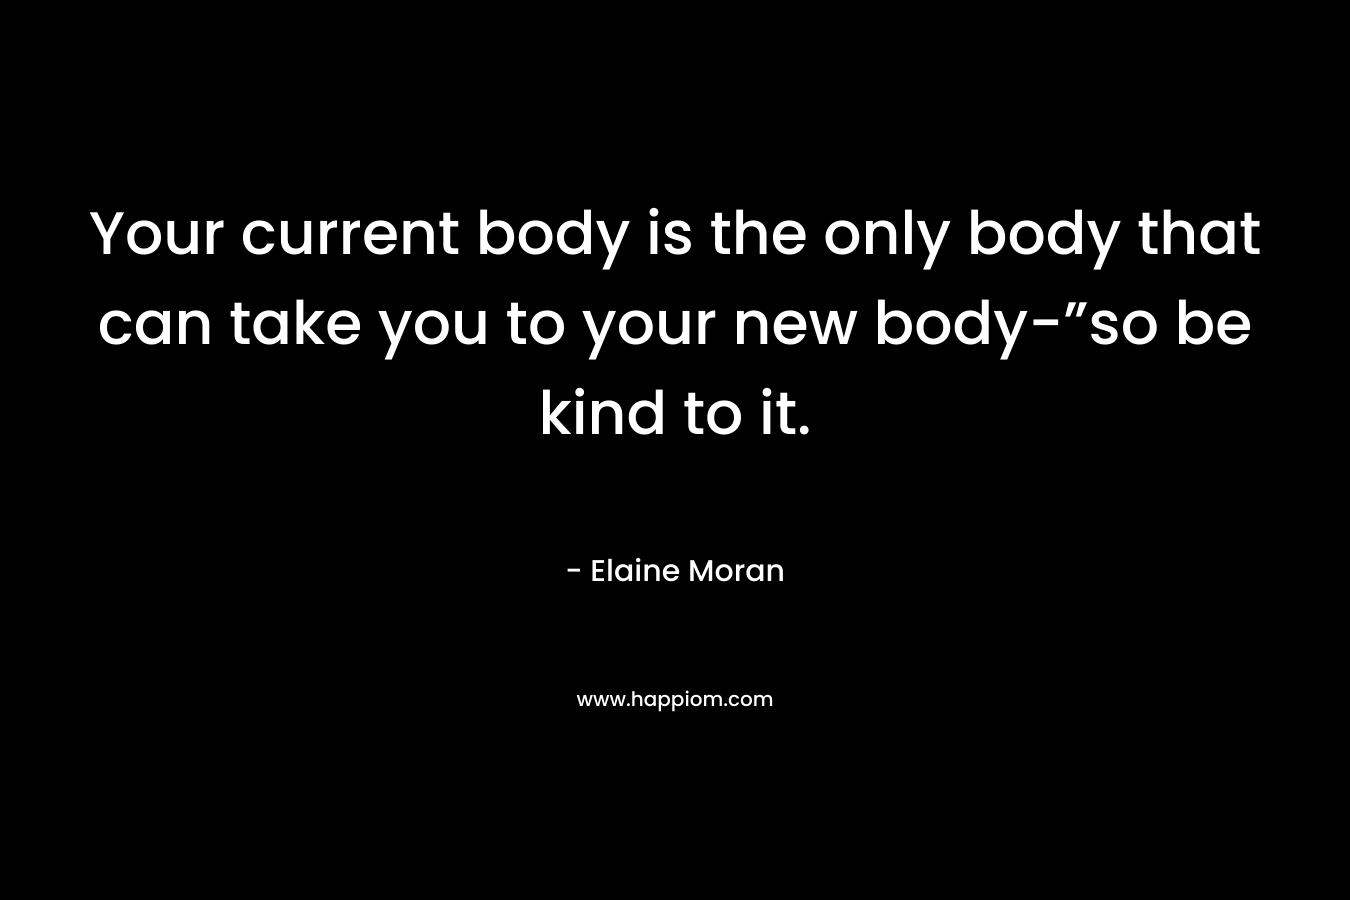 Your current body is the only body that can take you to your new body-”so be kind to it.